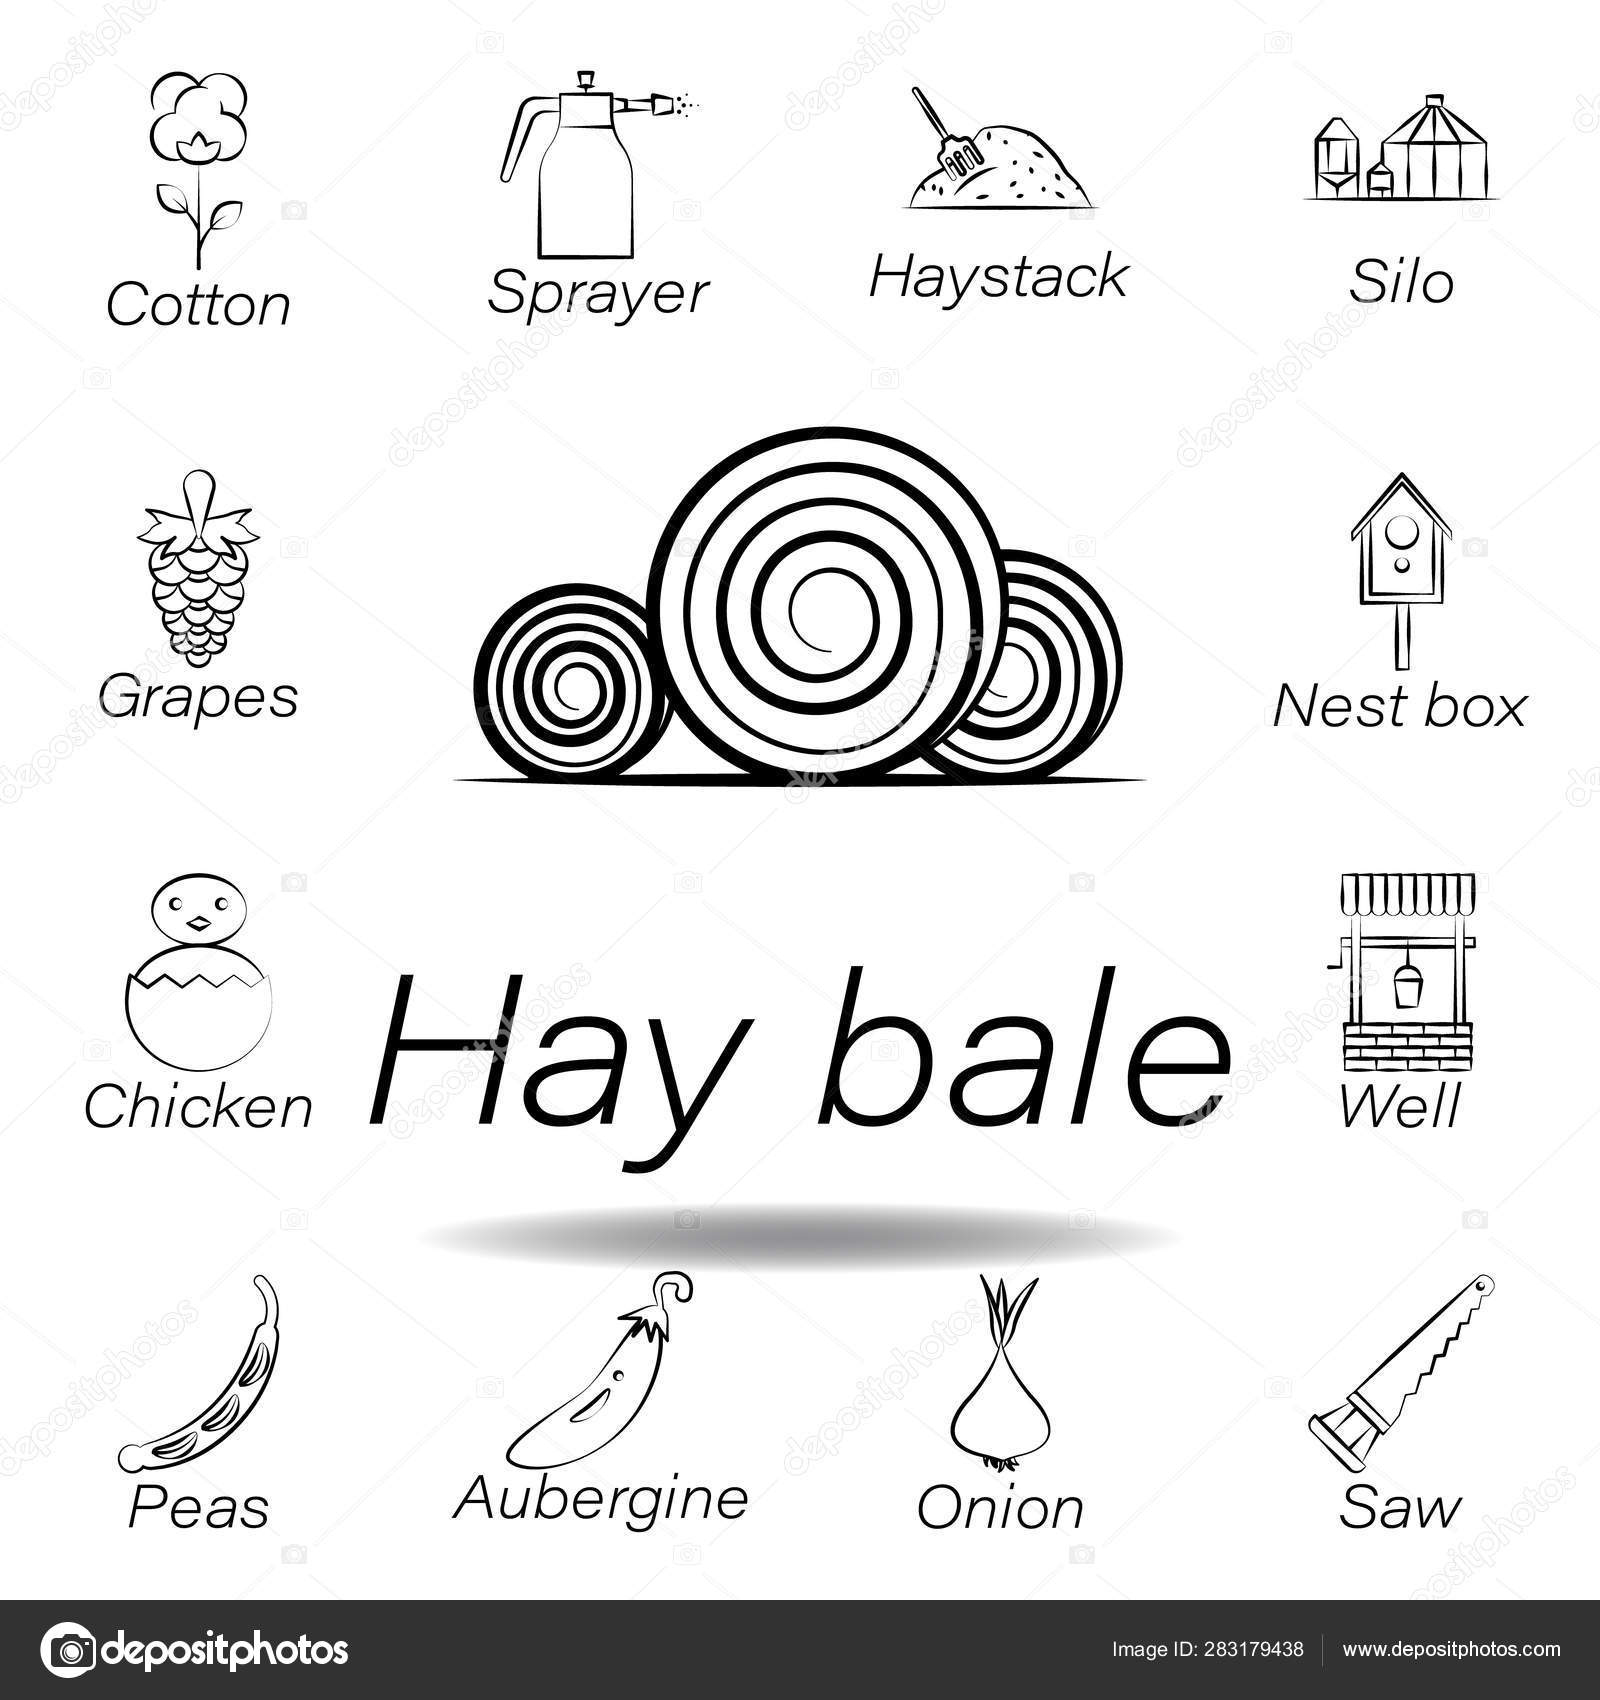 Hay Bale Hand Draw Icon Element Of Farming Illustration Icons Signs And Symbols Can Be Used For Web Logo Mobile App Ui Ux Vector Image By C Fidaneagle Gmail Com Vector Stock